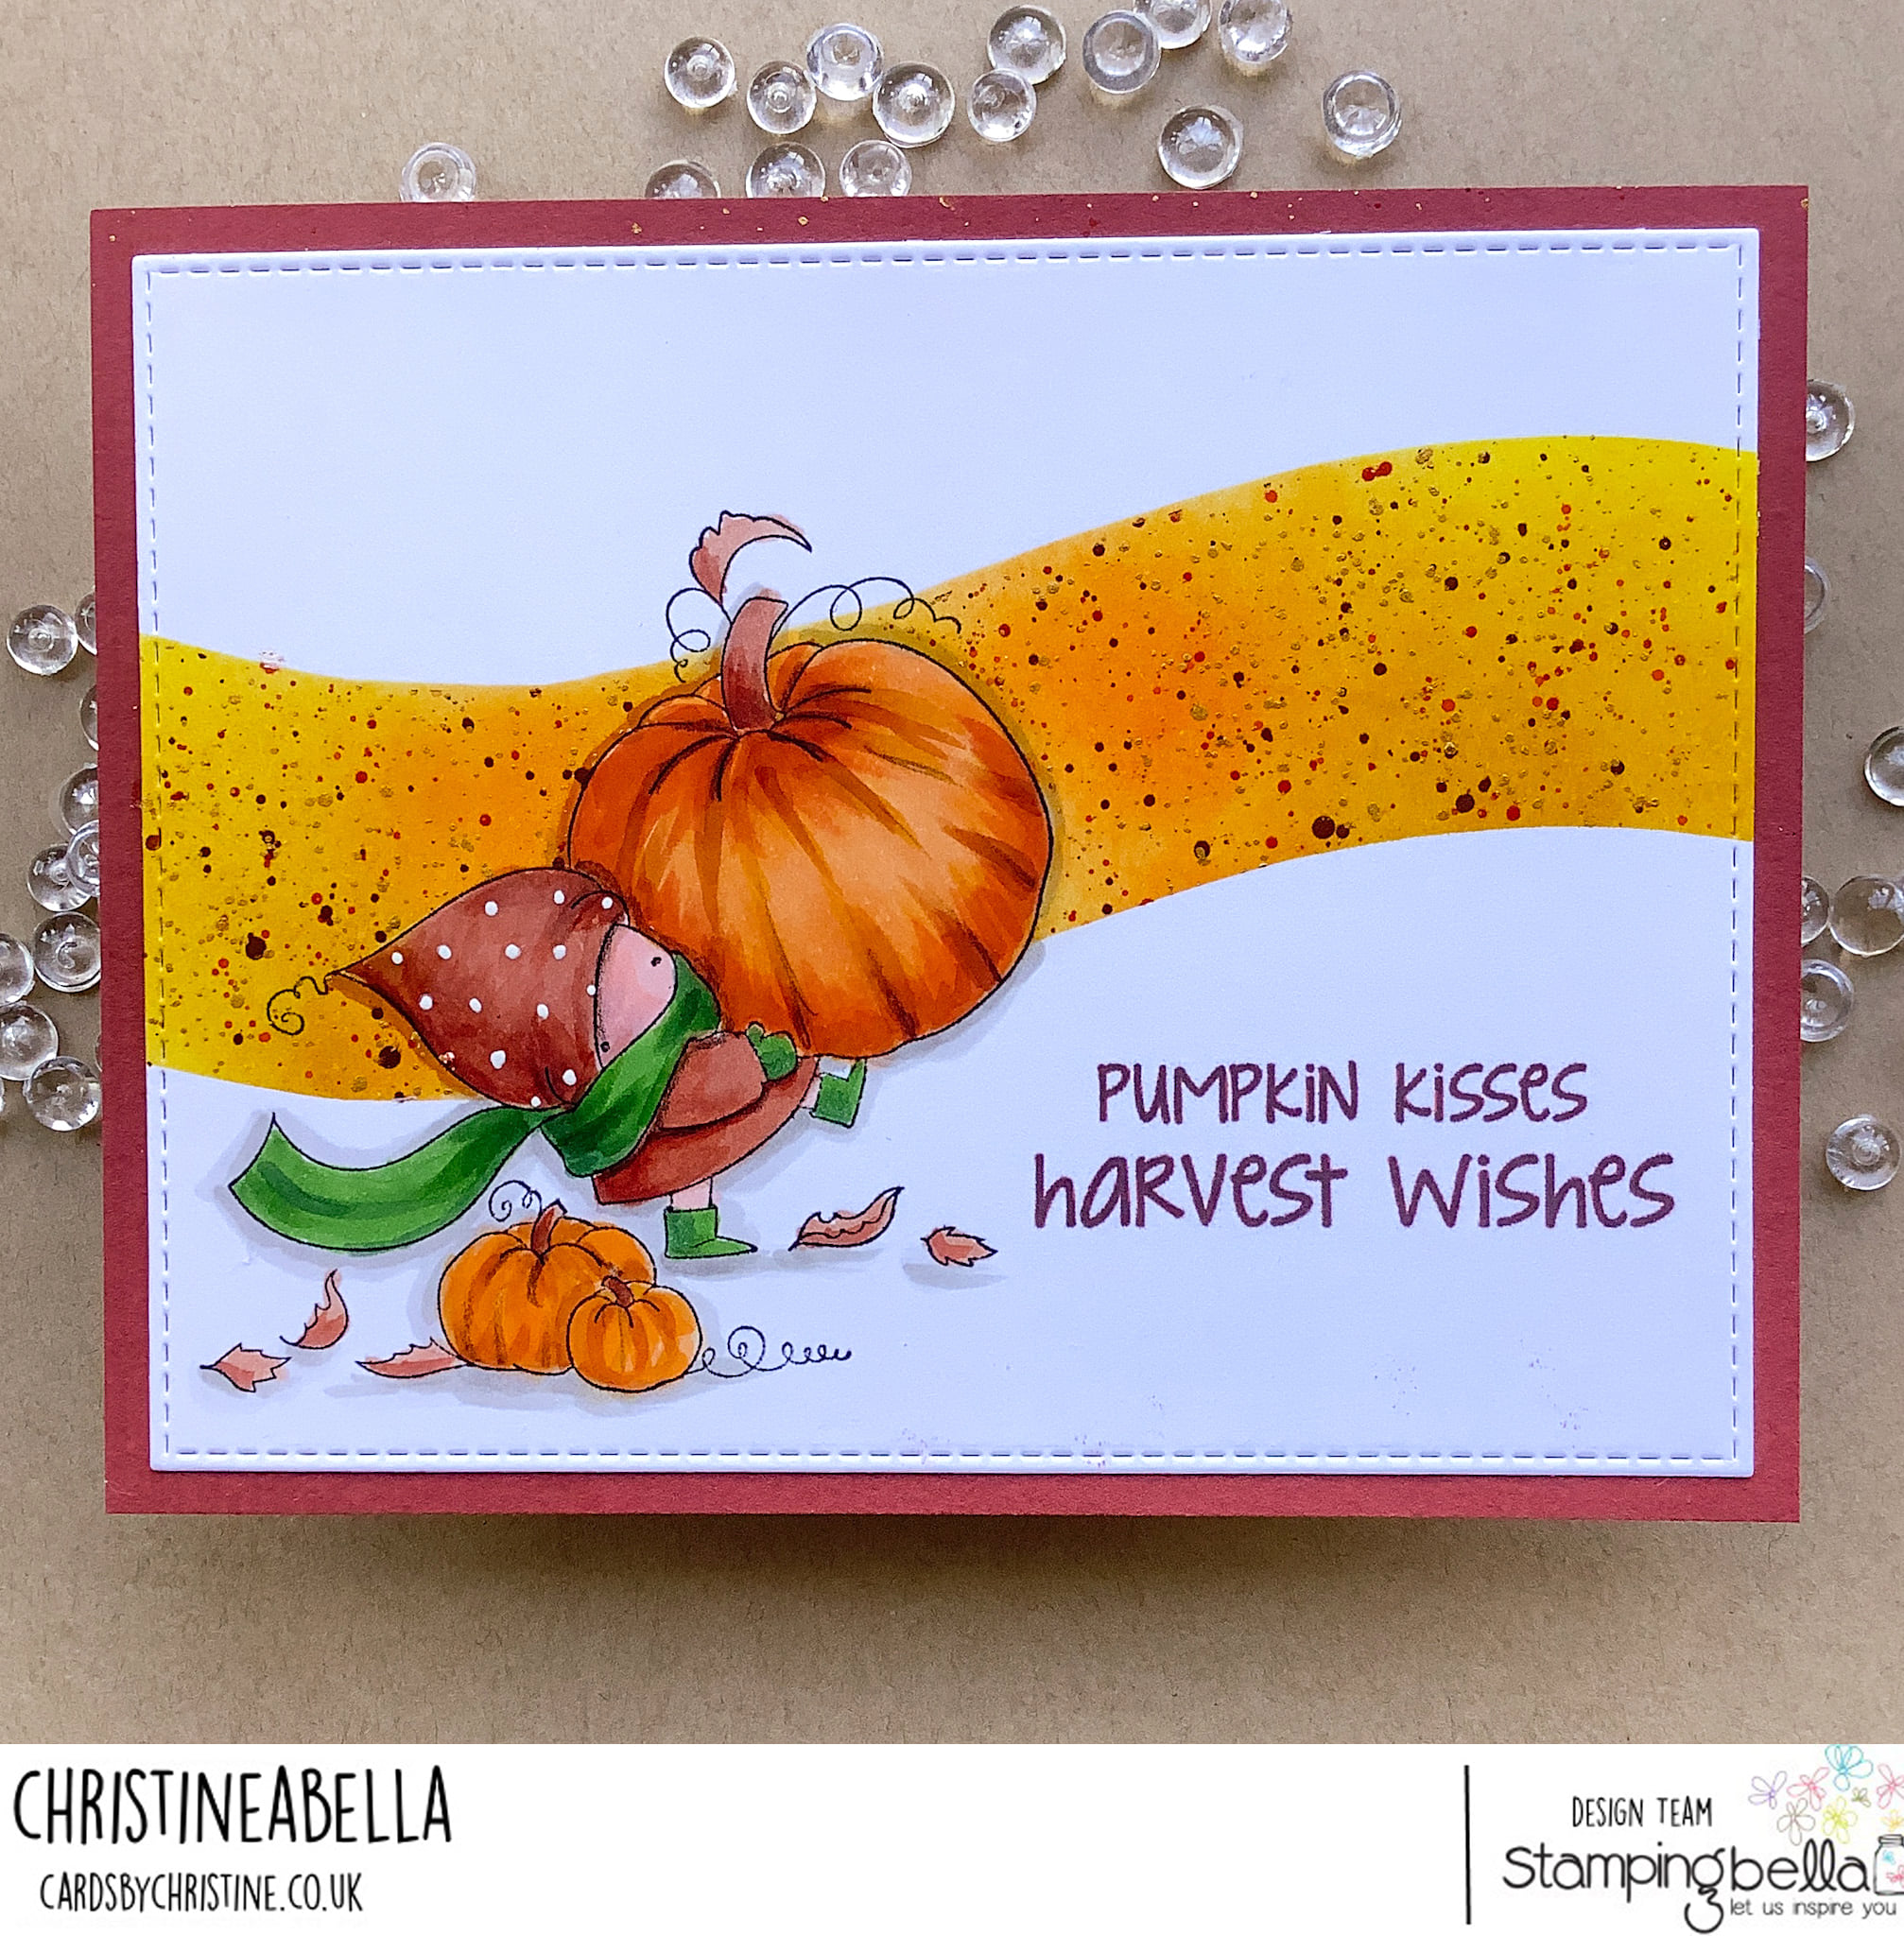 www.stampingbella.com: rubber stamp used: Bundle Girl at the PUMPKIN PATCH card by Christine Levison